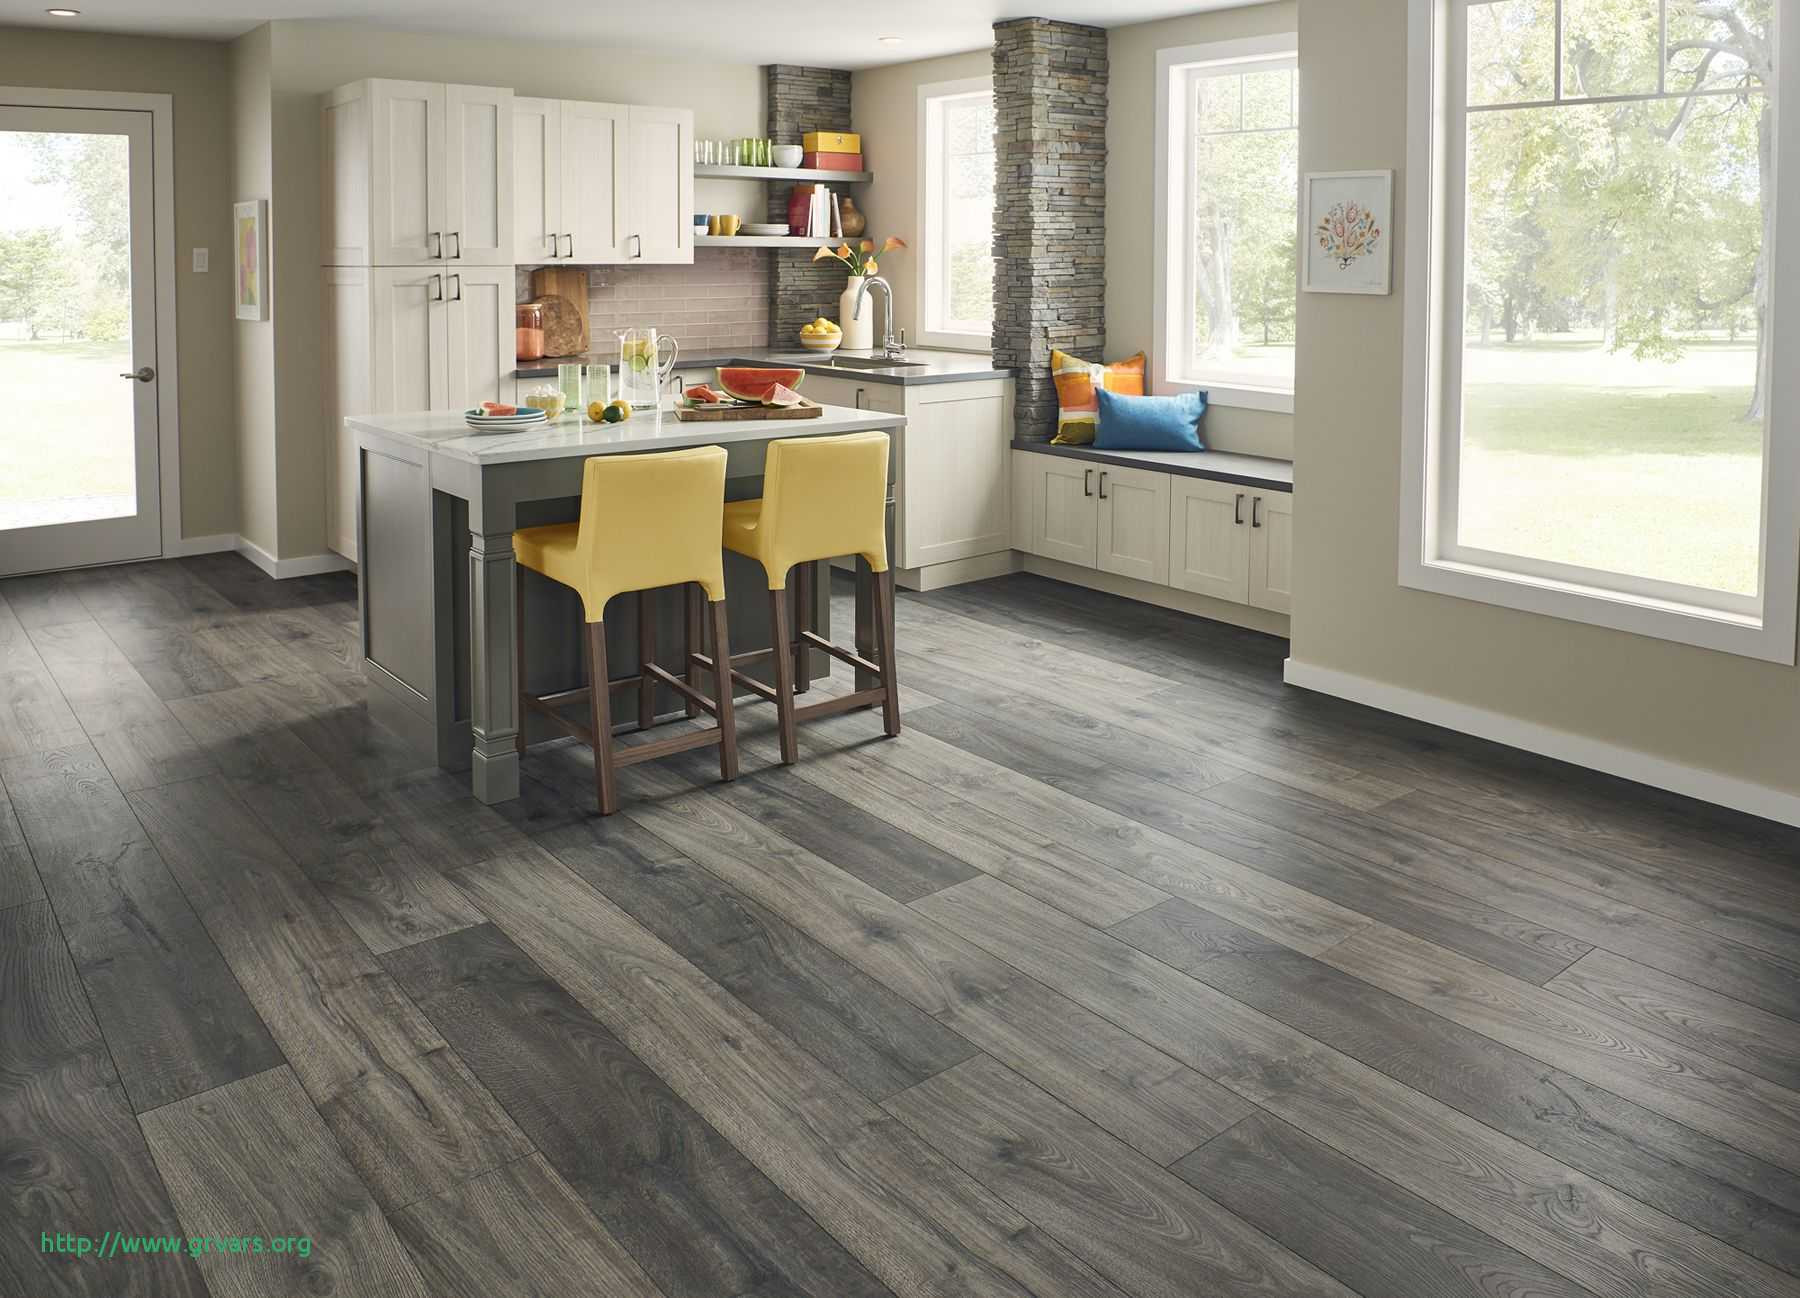 average hardwood floor cost per square foot of 21 frais laminate flooring installation labor cost per square foot throughout laminate flooring installation labor cost per square foot inspirant let your imagination roll with the smoky